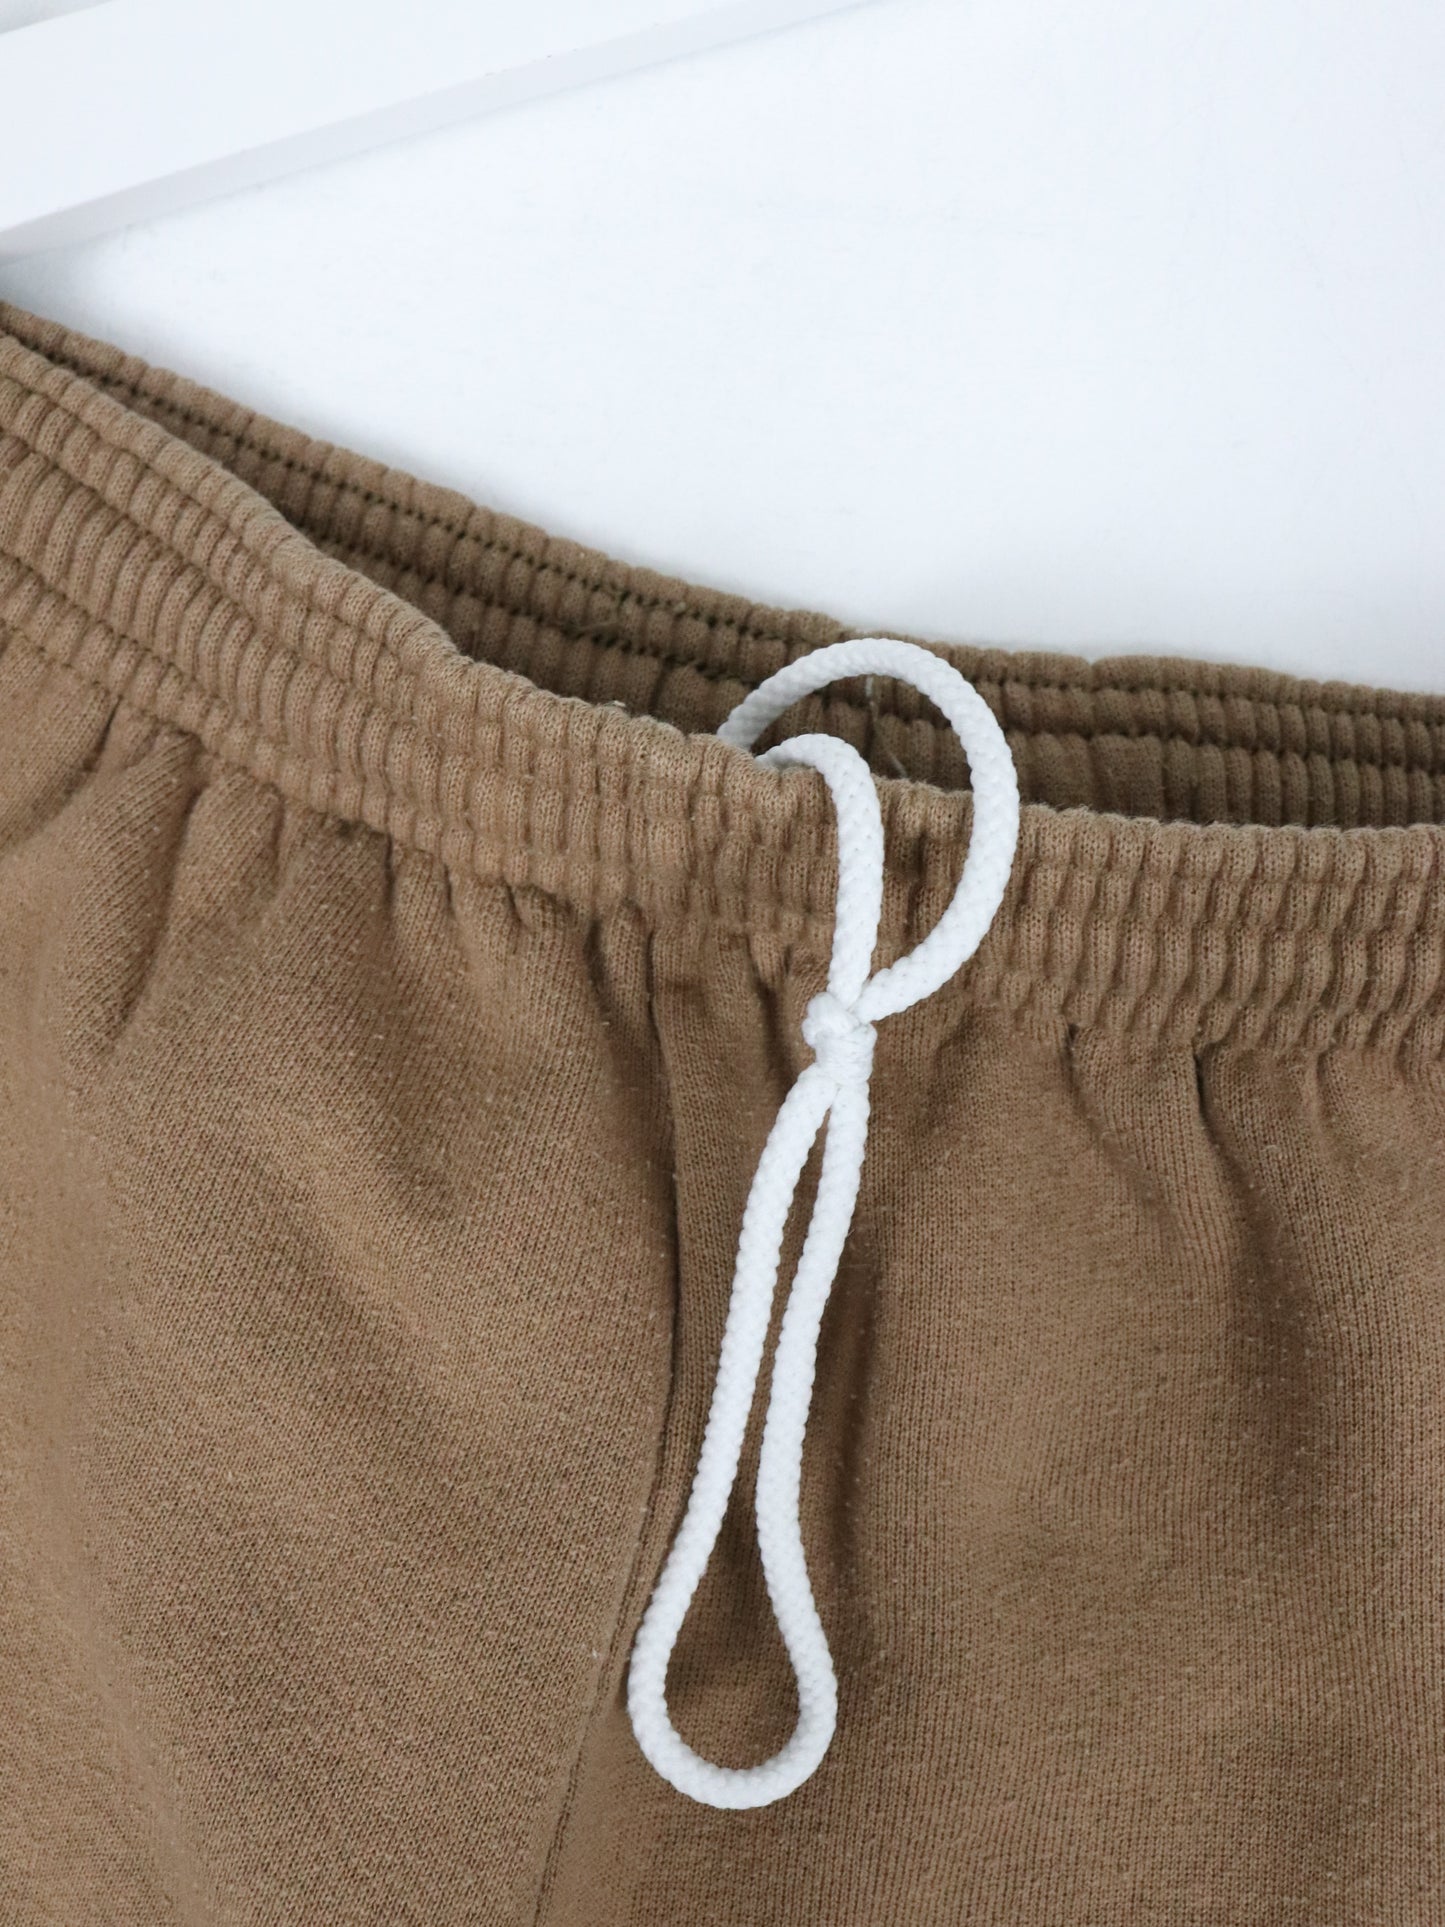 Vintage Hanes Pants Mens Small Beige Cuffed Sweat Athletic 90s 24 x 28